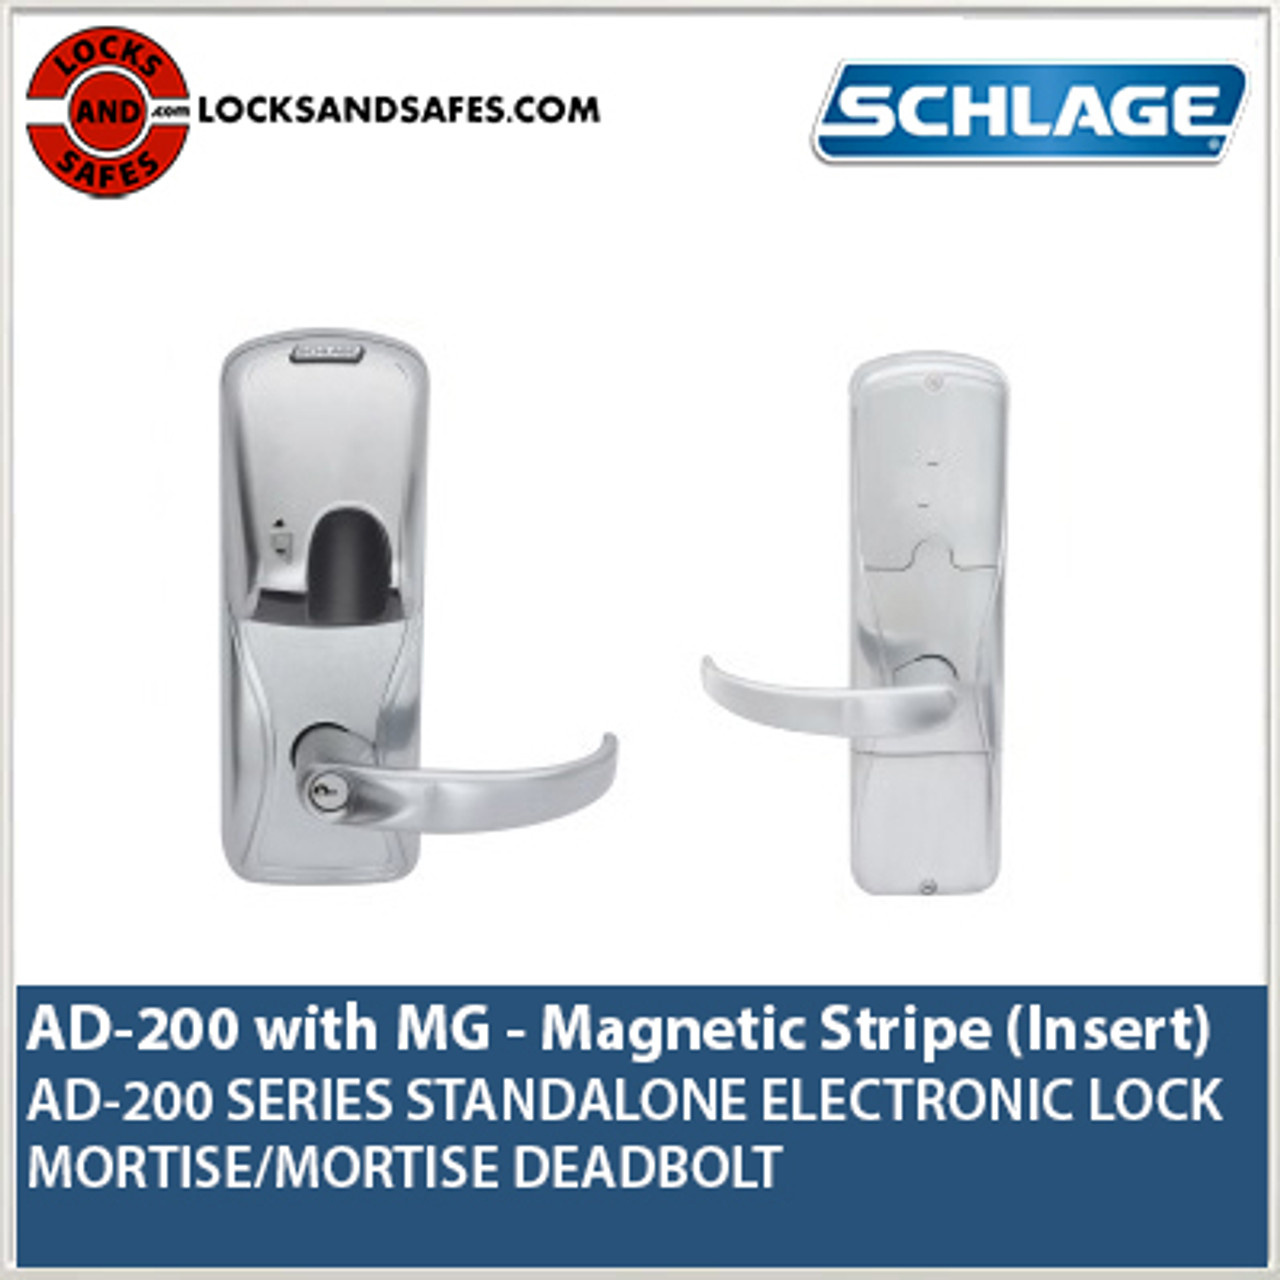 Schlage CO-200 Series Stand Alone Offline Lock with Magnetic